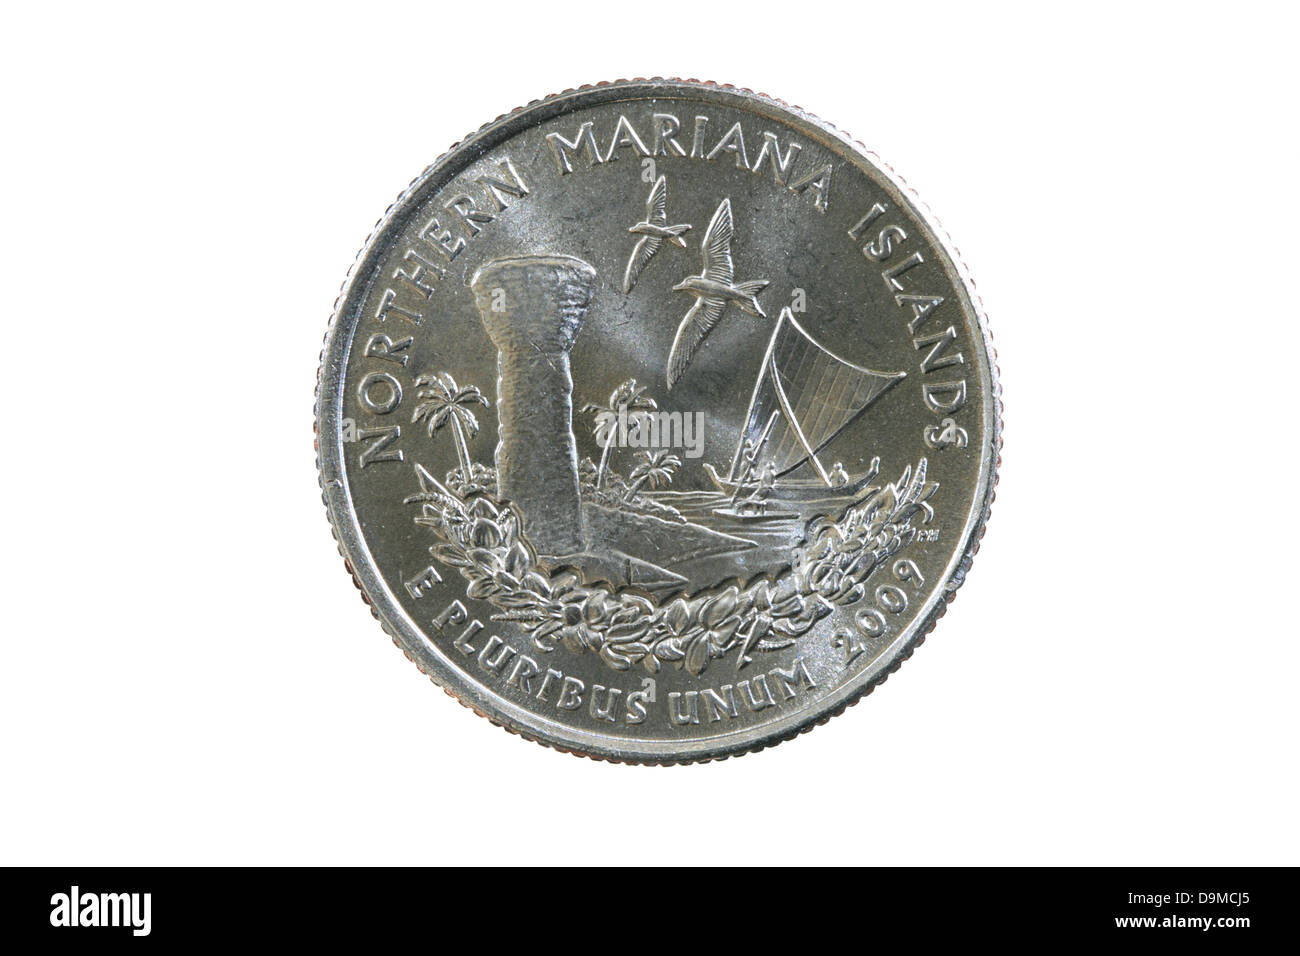 US Quarter coin from the Northern Mariana Islands Stock Photo